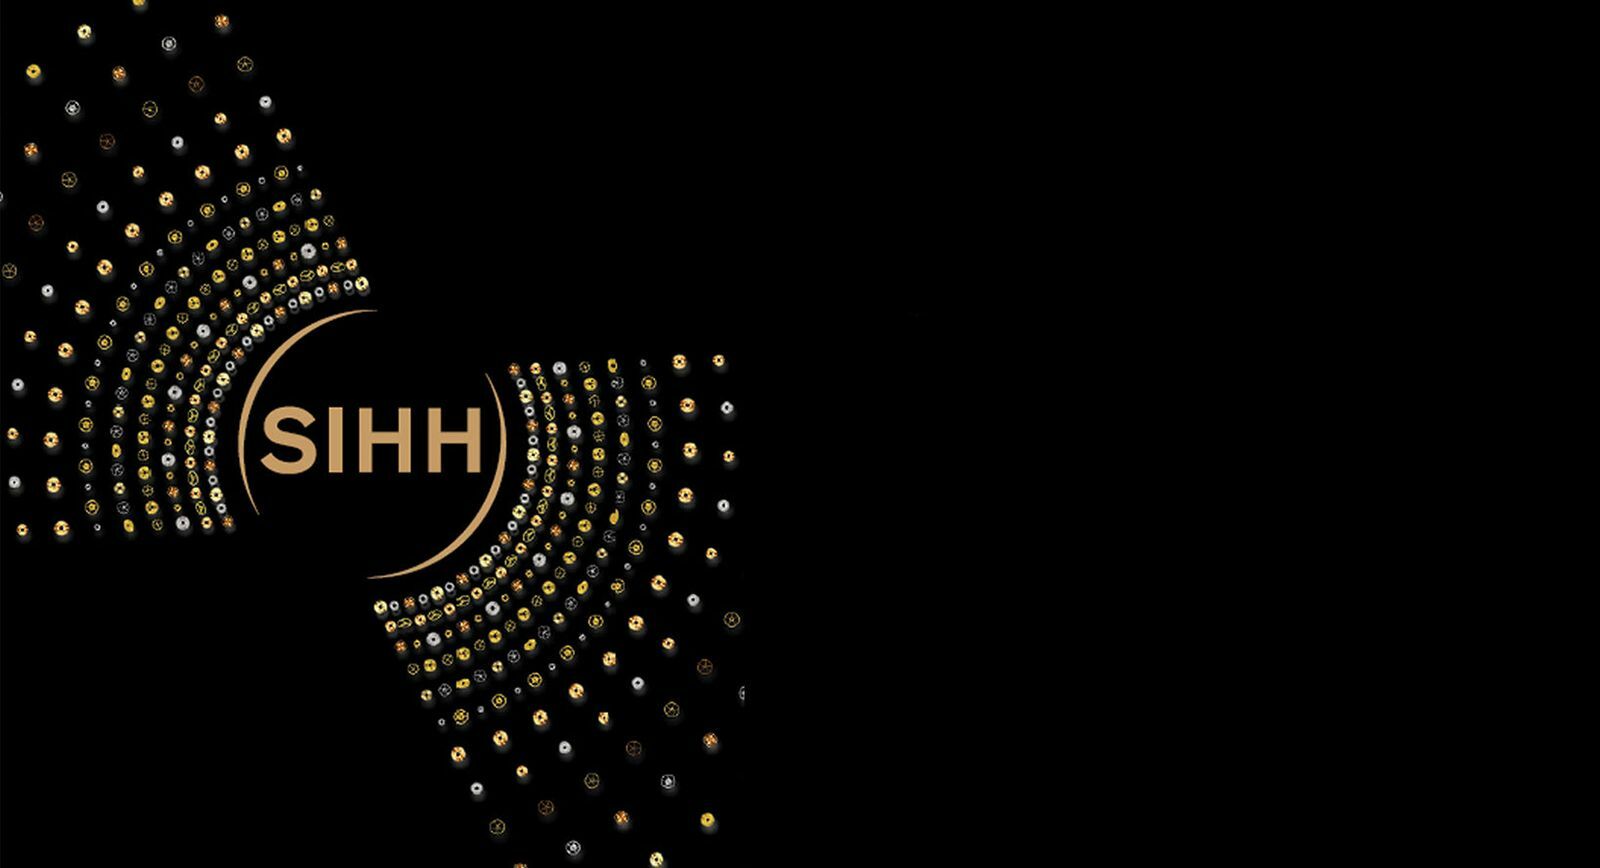 SIHH 2019: Dazzling new creations are revealed!